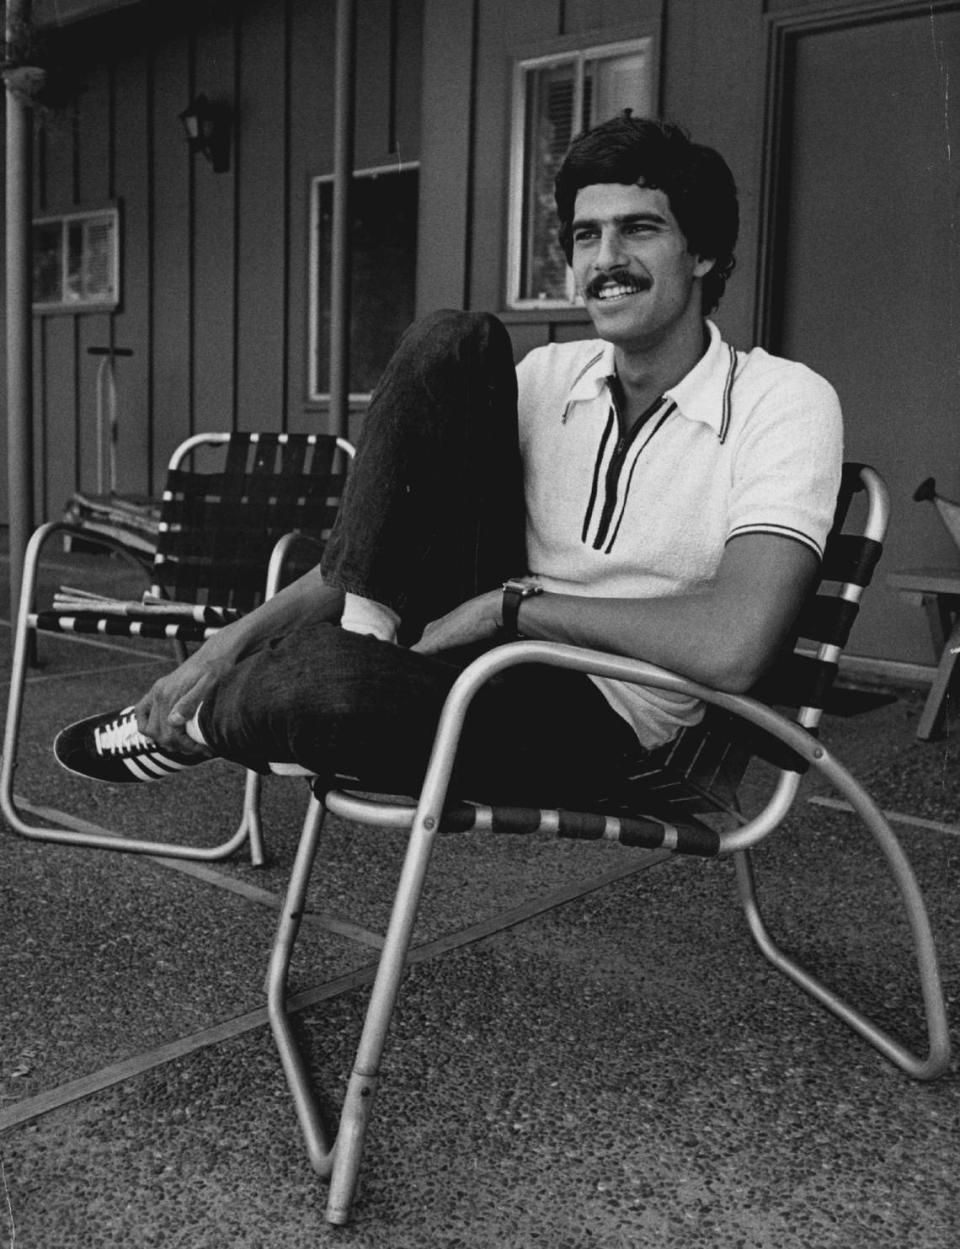 Olympic gold medal swimmer Mark Spitz, back home from winning seven gold medals at the 1972 games in Munich, enjoys a few minutes of free time at the Carmichael home of Sherm Chavoor, his swim coach and adviser, in 1972.